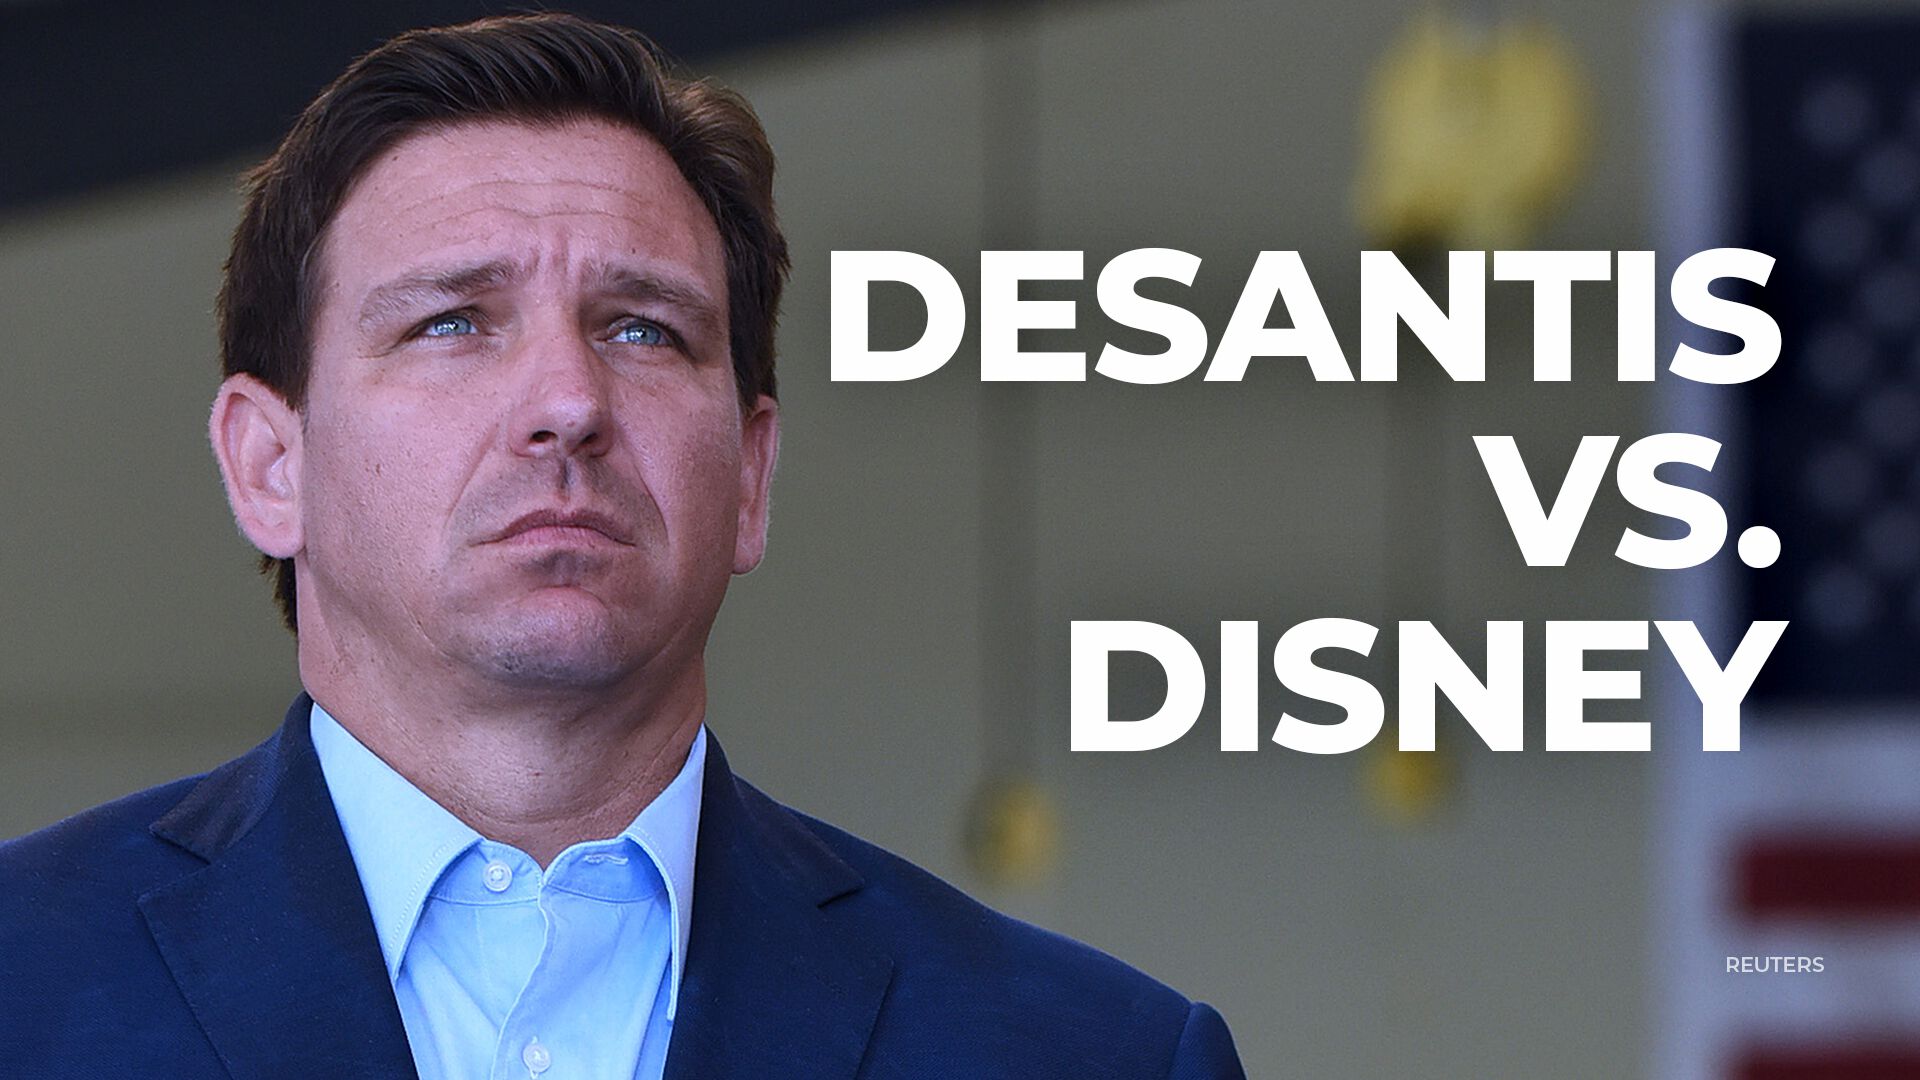 Florida Governor Ron DeSantis is running for re-election. His current legal fight with Disney is the latest high-profile headline involving the potential presidential candidate.